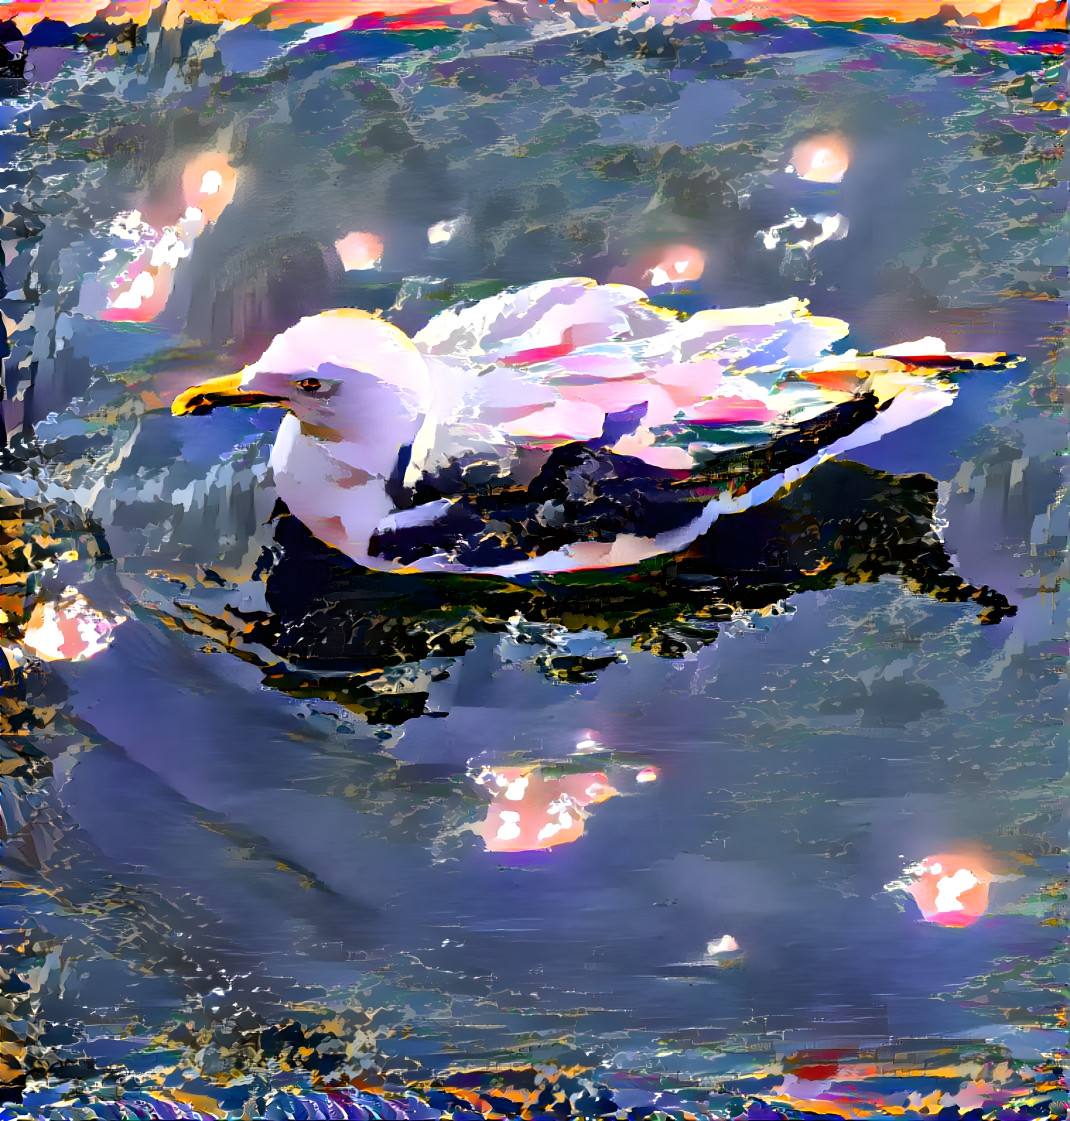 Reflecting on a Seagull